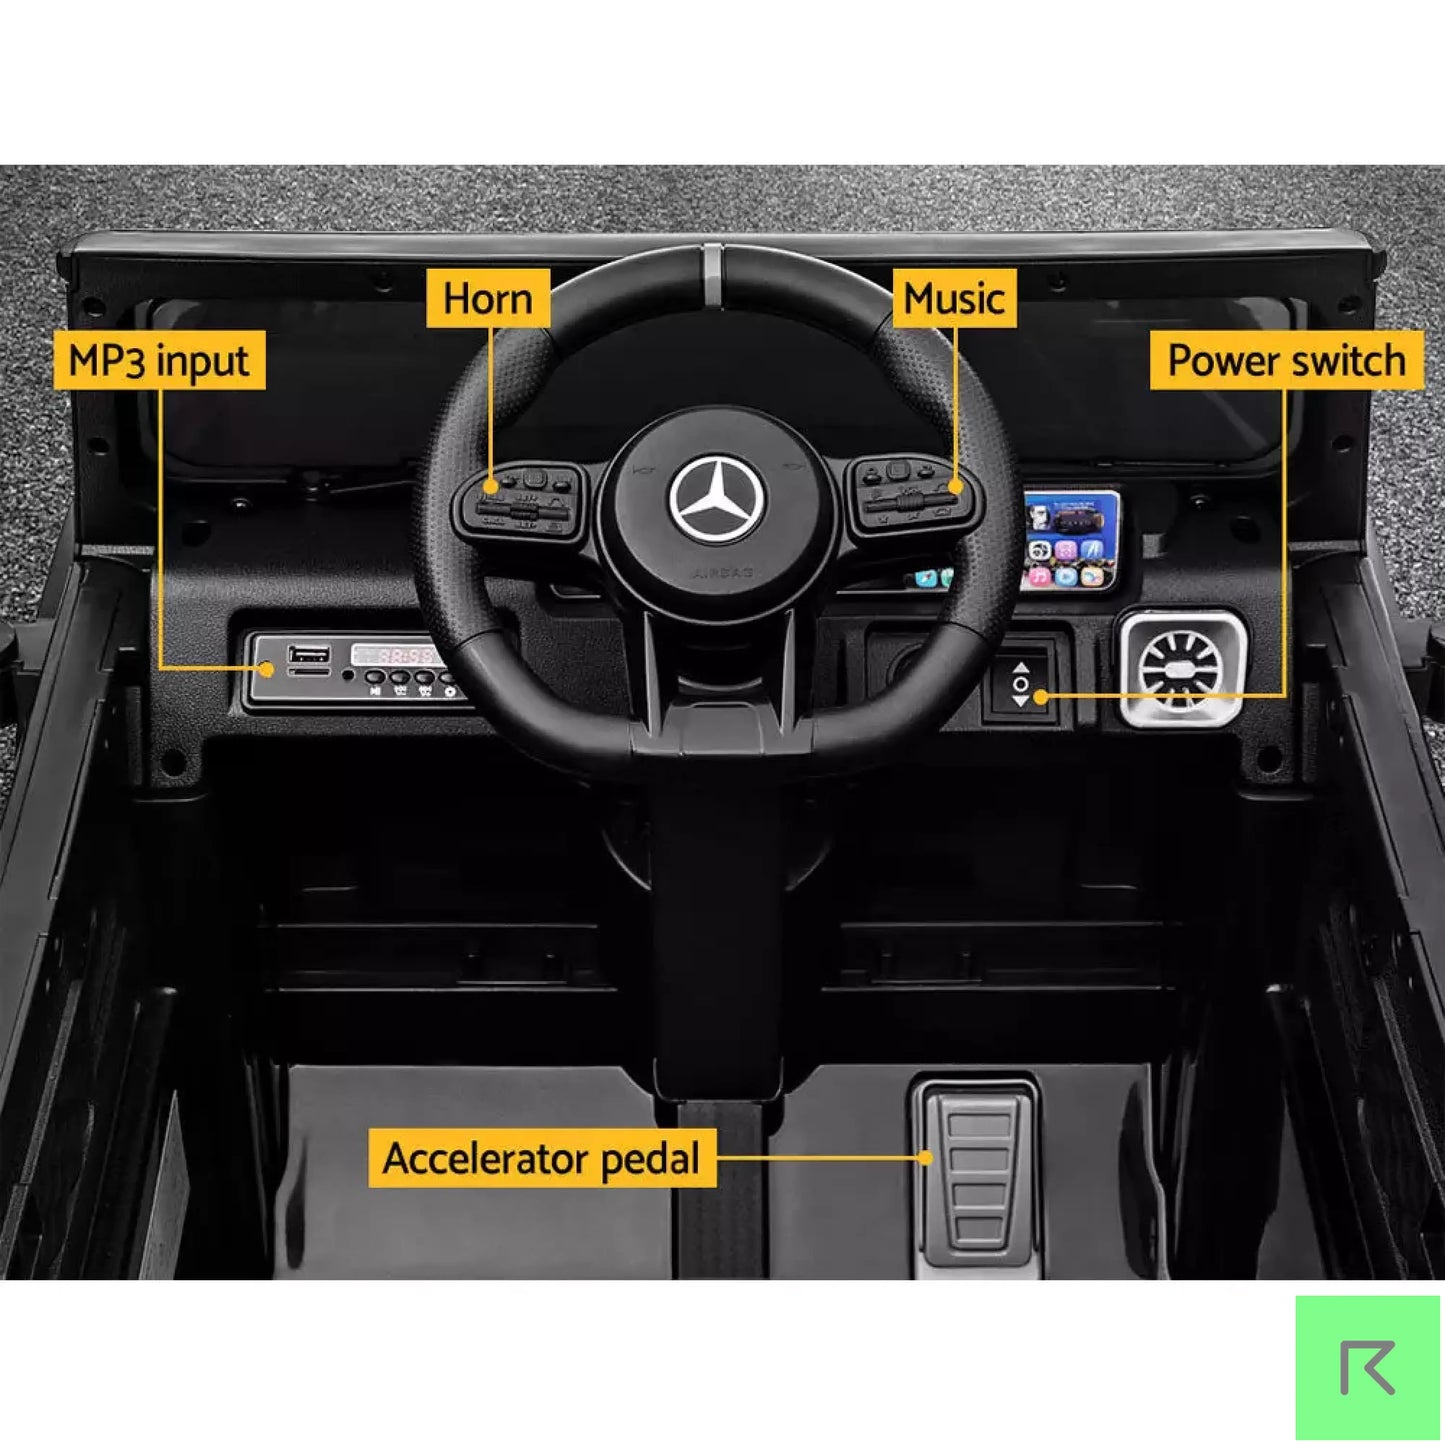 Mercedes Benz G63 AMG Licensed Kids Ride On Car with Remote